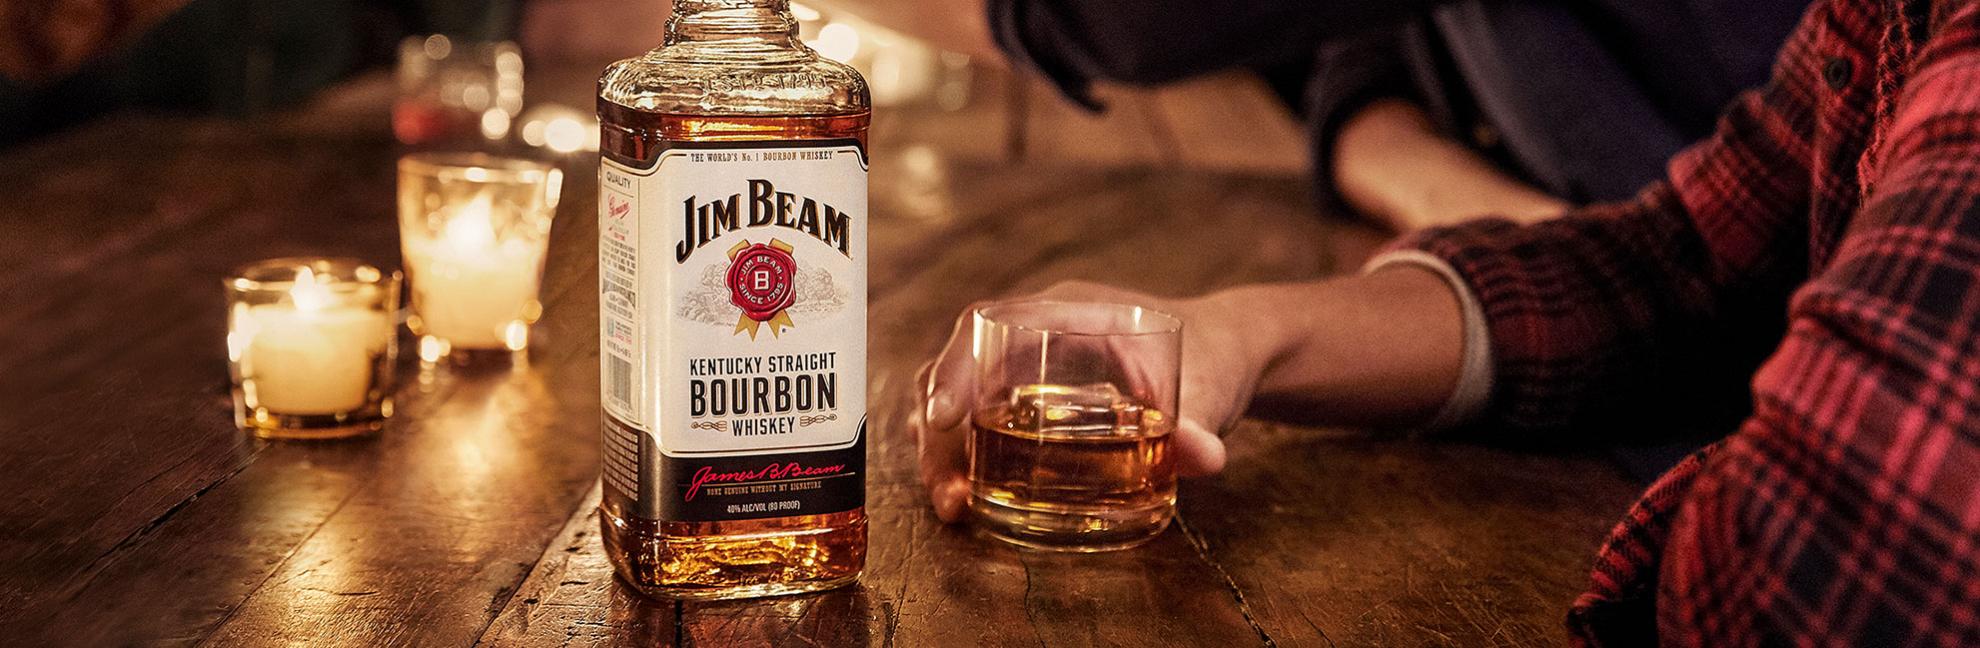 Pour Out the Jim Beam Augmented Reality Experience